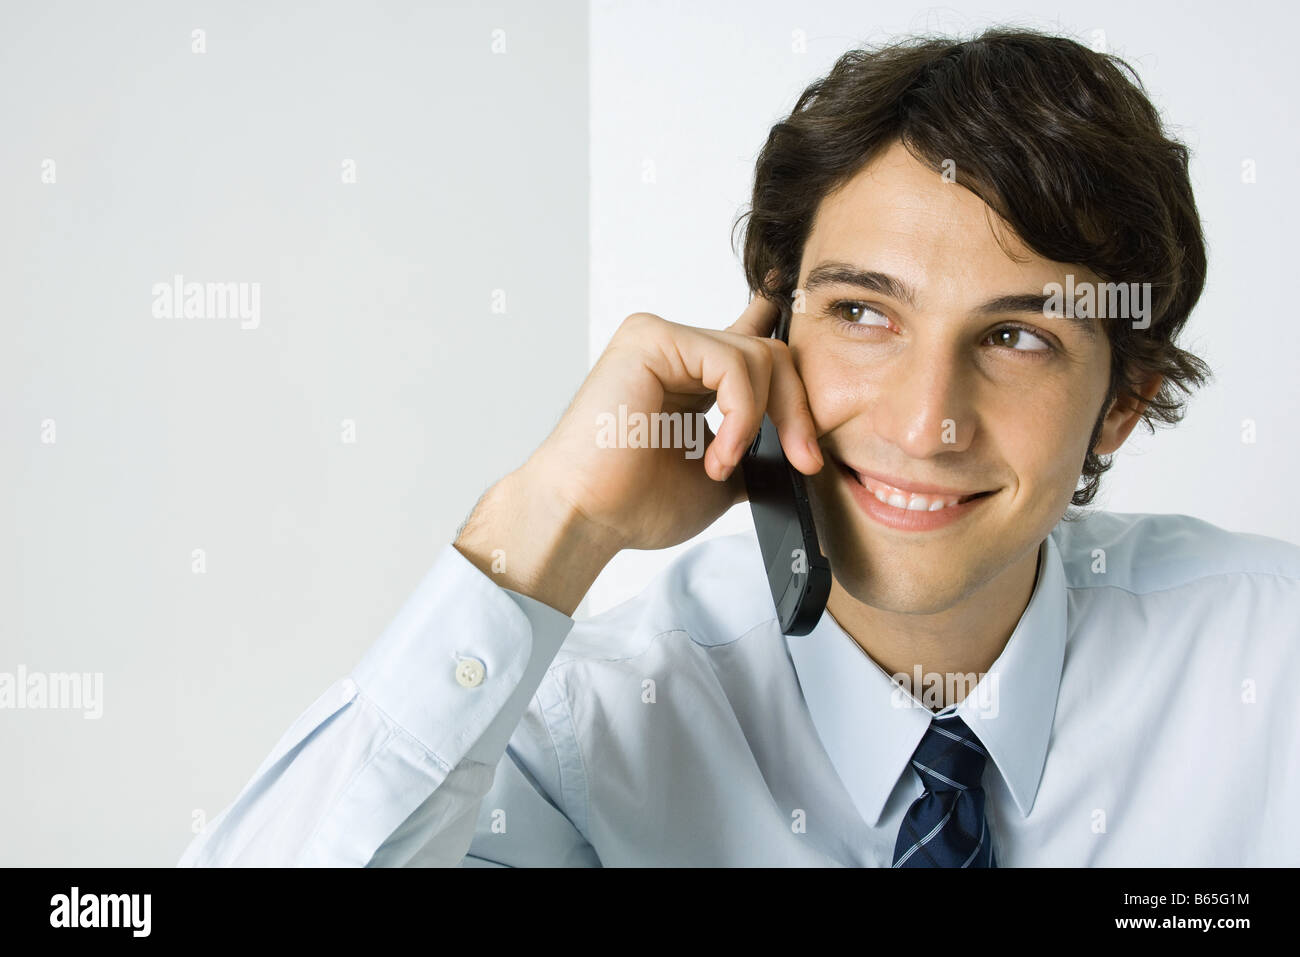 Young man using cell phone, smiling, Portrait Banque D'Images